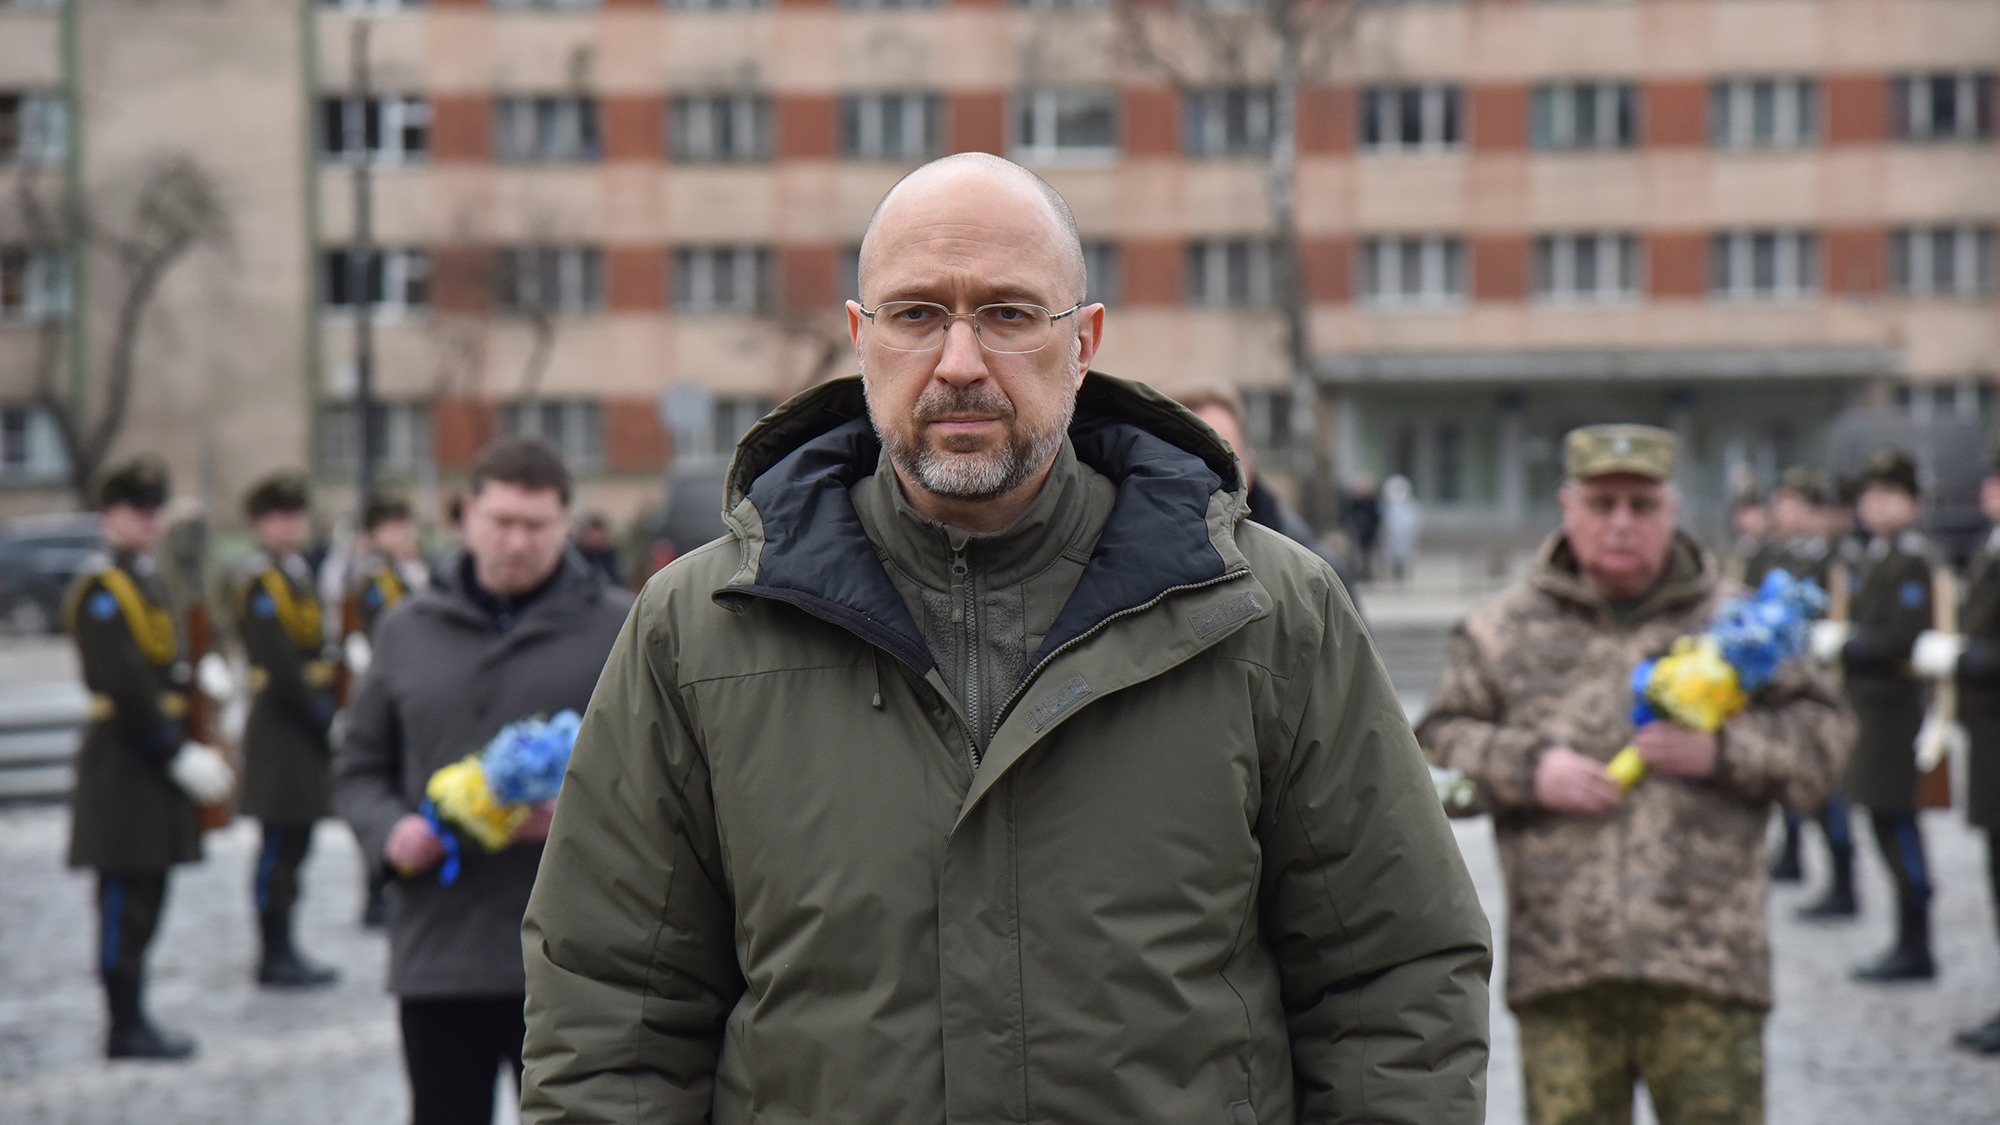 Prime Minister of Ukraine Denys Shmyhal laying flowers at the graves of Ukrainian soldiers at Lychakiv Cemetery in Lviv, Ukraine on February 22.